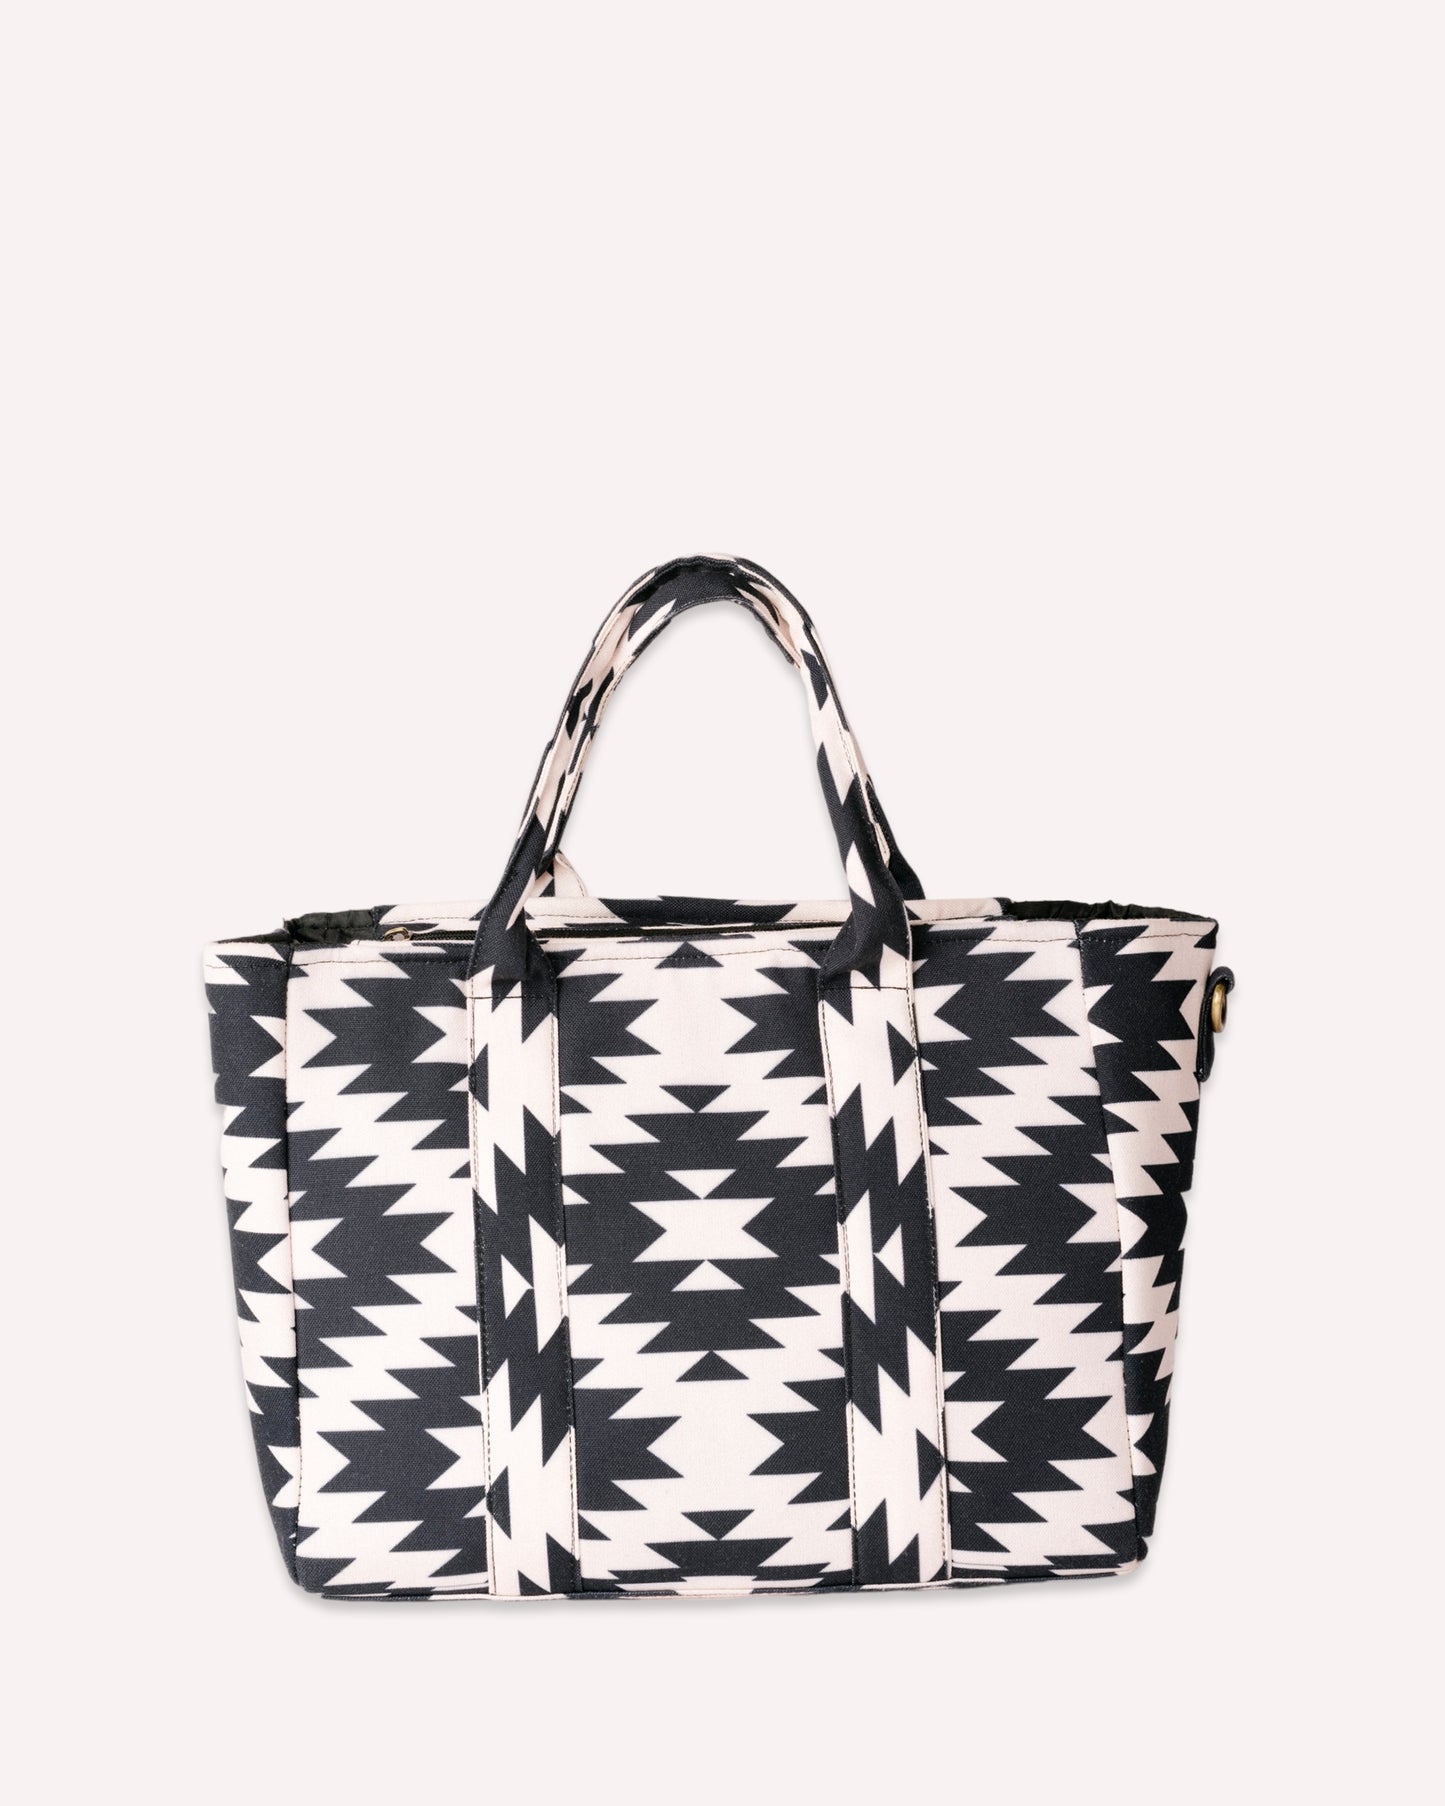 The City Tote Black and White